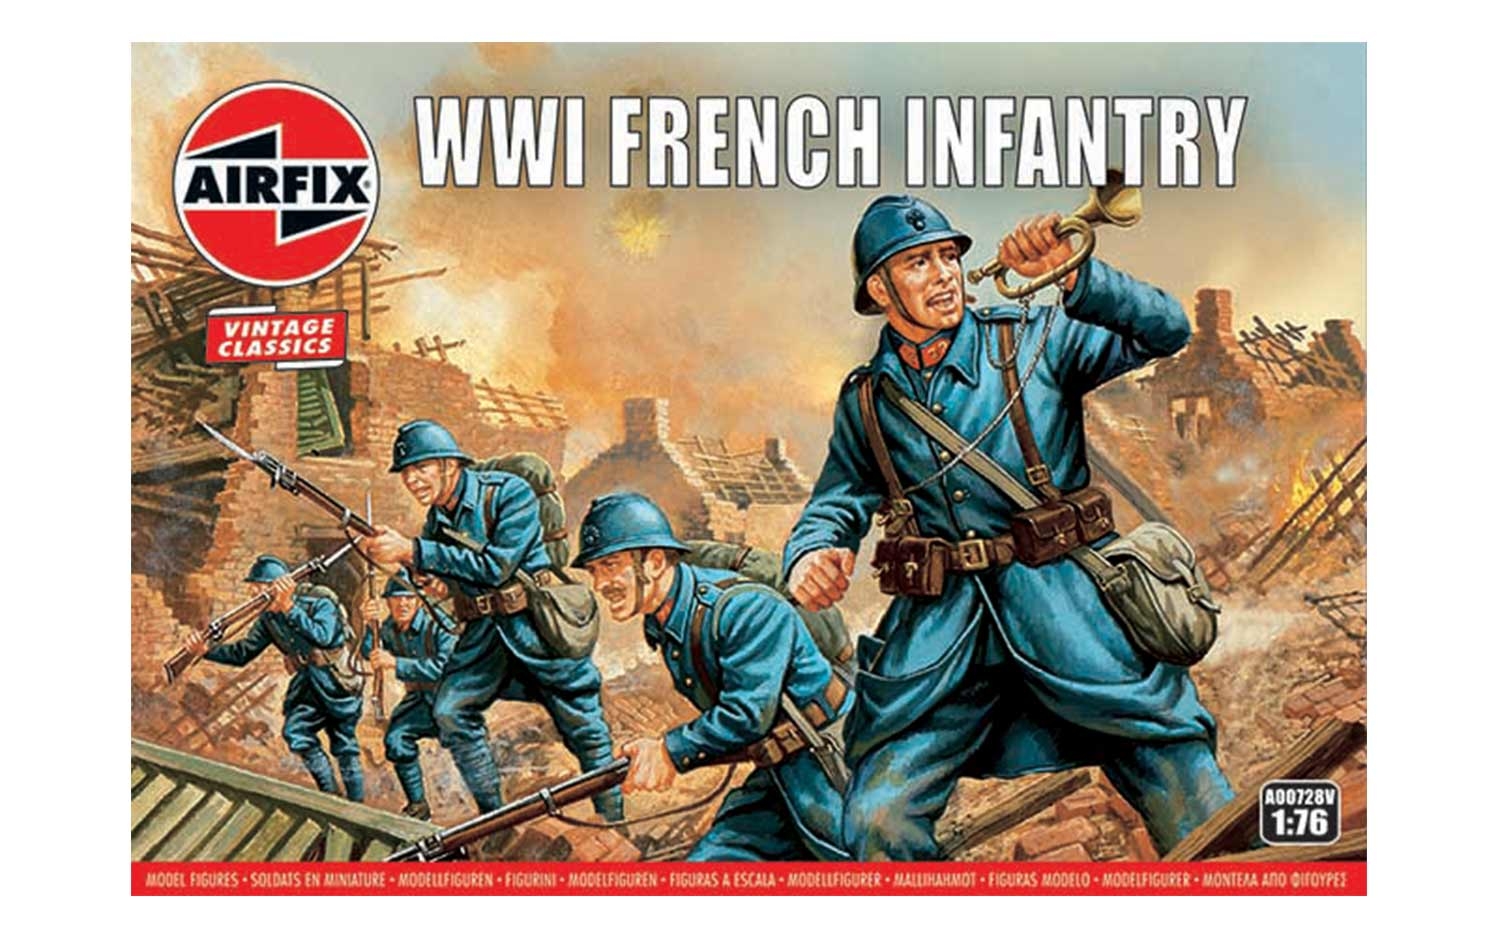 Airfix Vintage Classics - WWI French Infantry 1:76